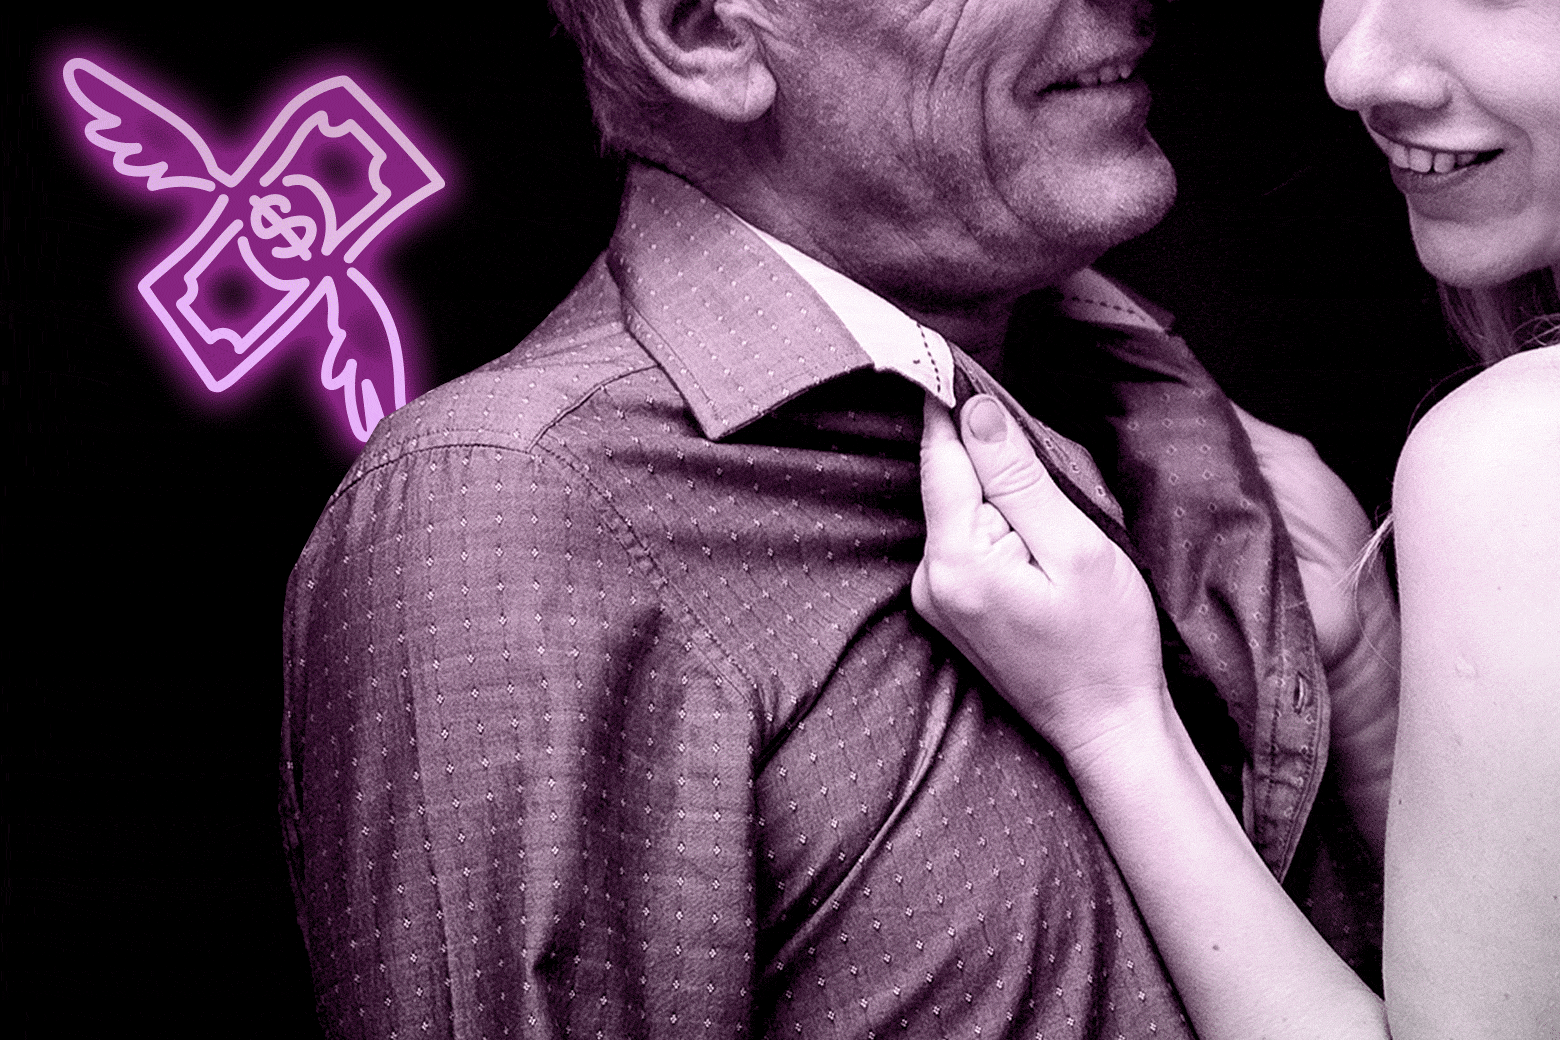 An older man and younger woman flirting with a neon dollar sign flying in neon.